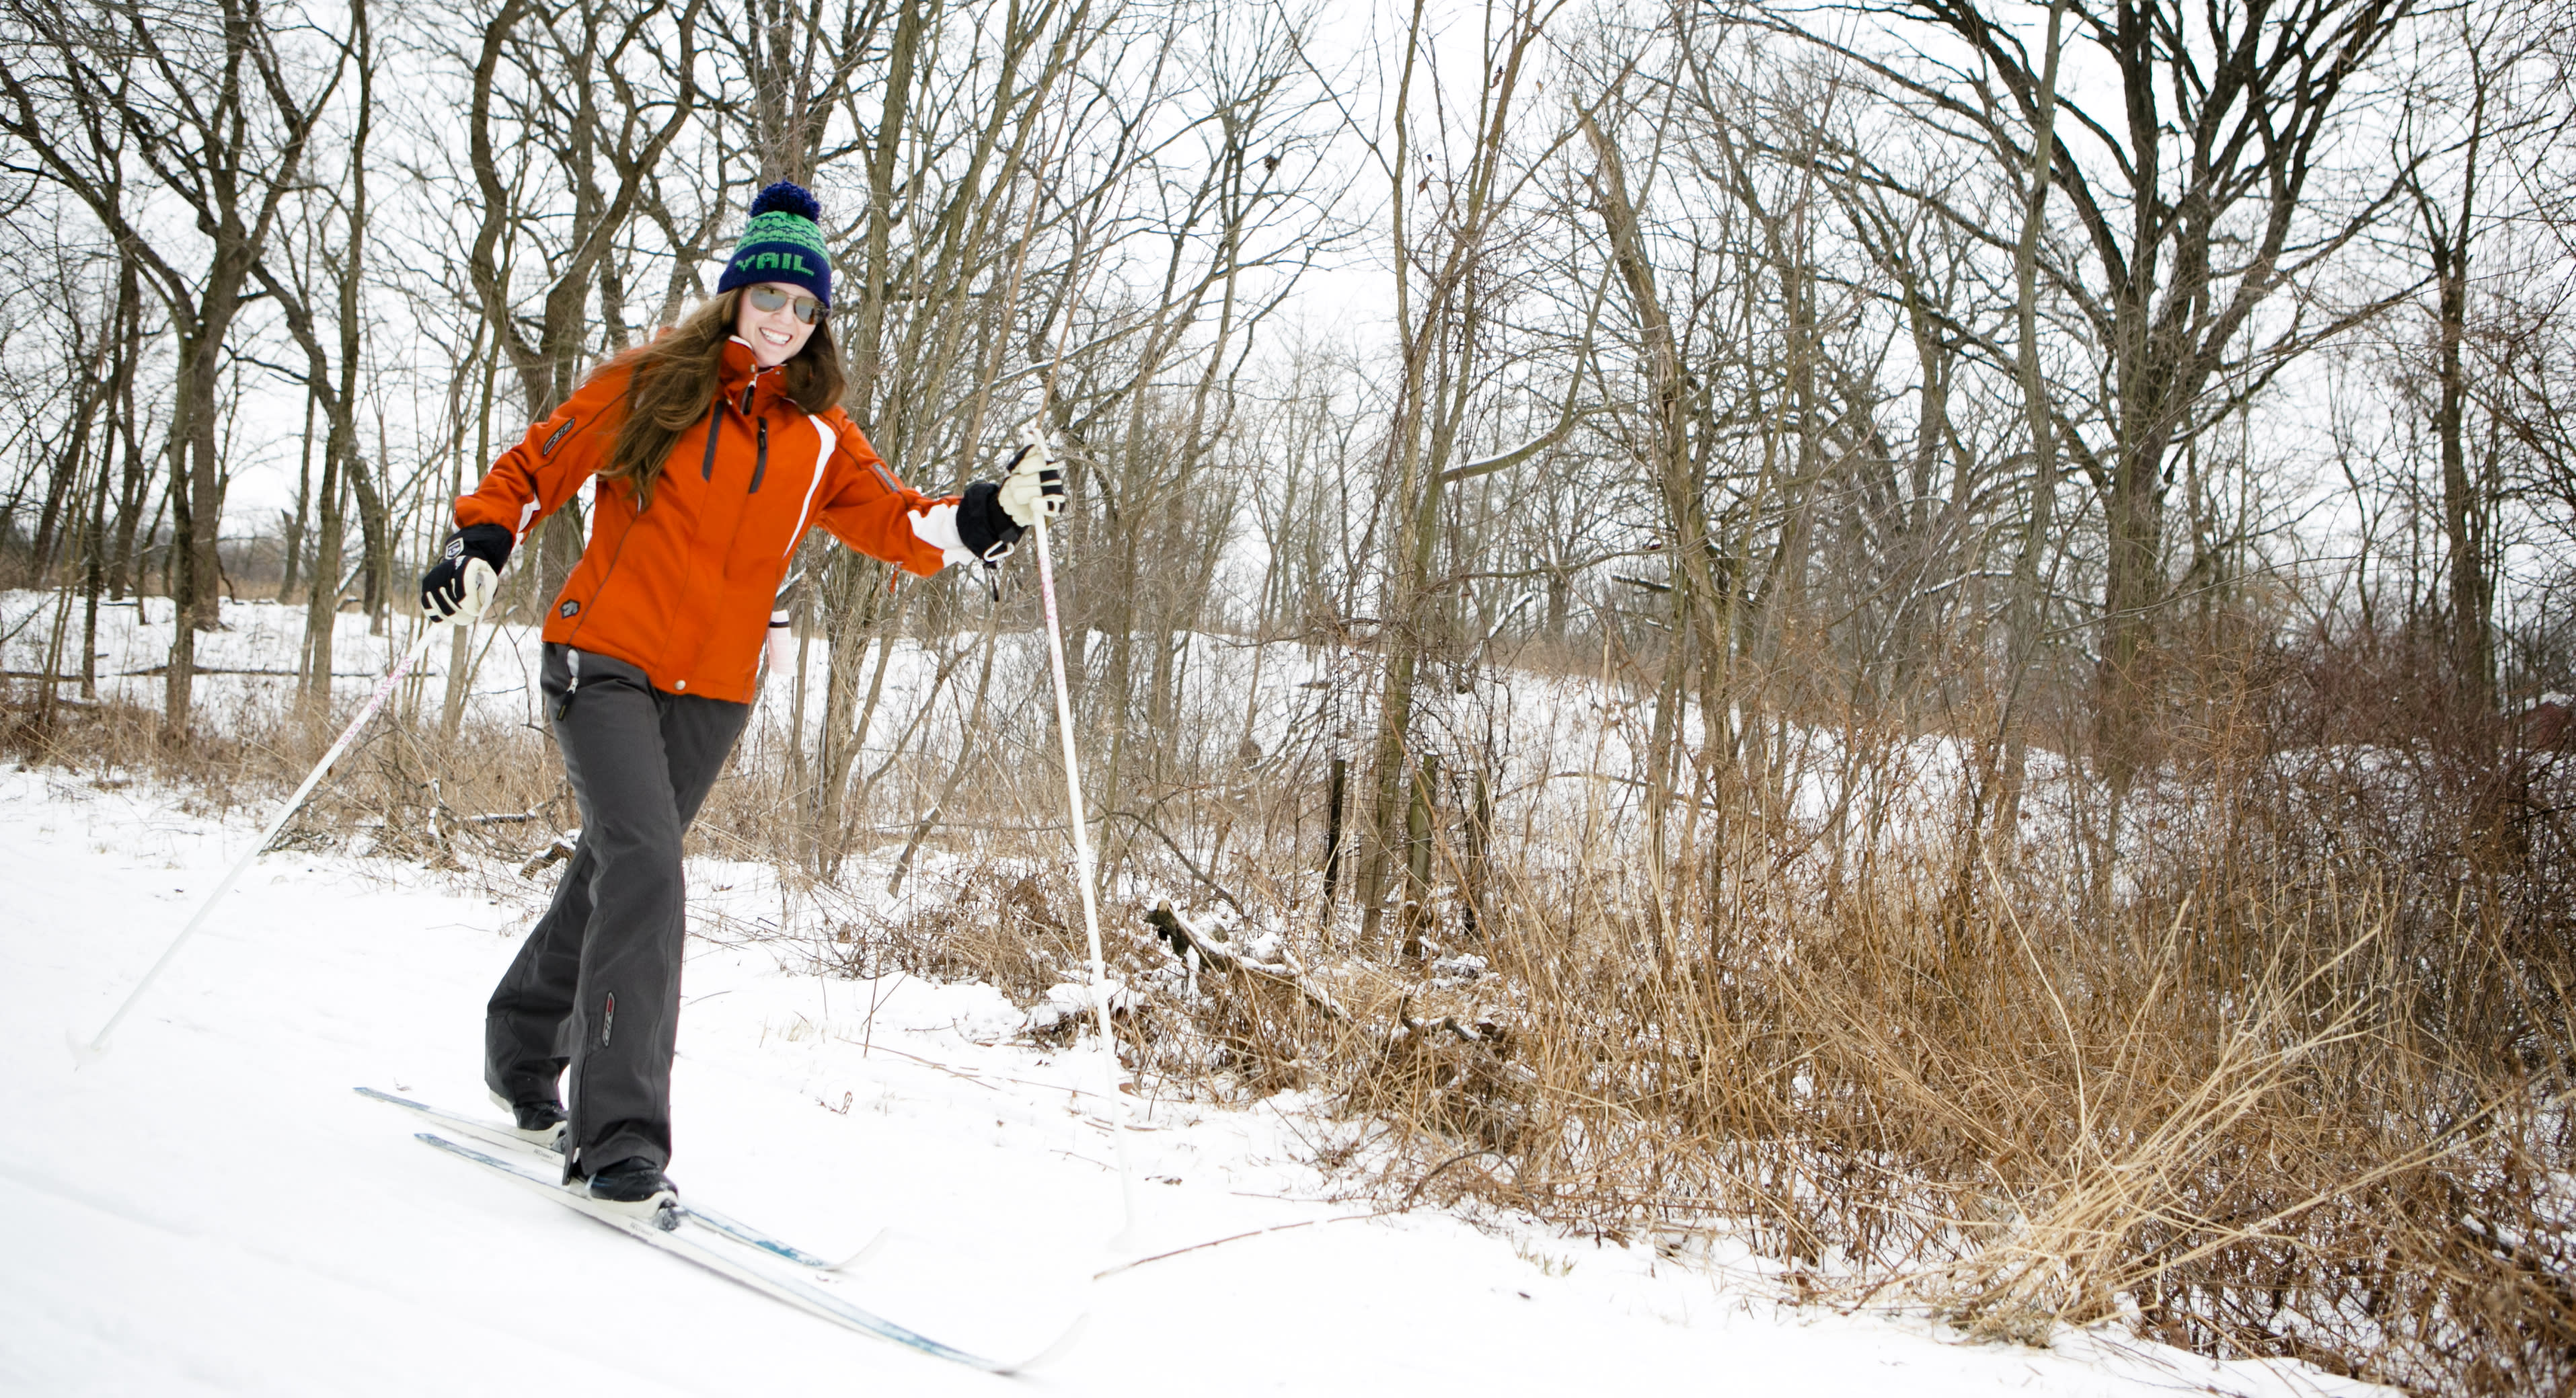 Cross Country Skiing at Busse Woods - Chicagoland things to do